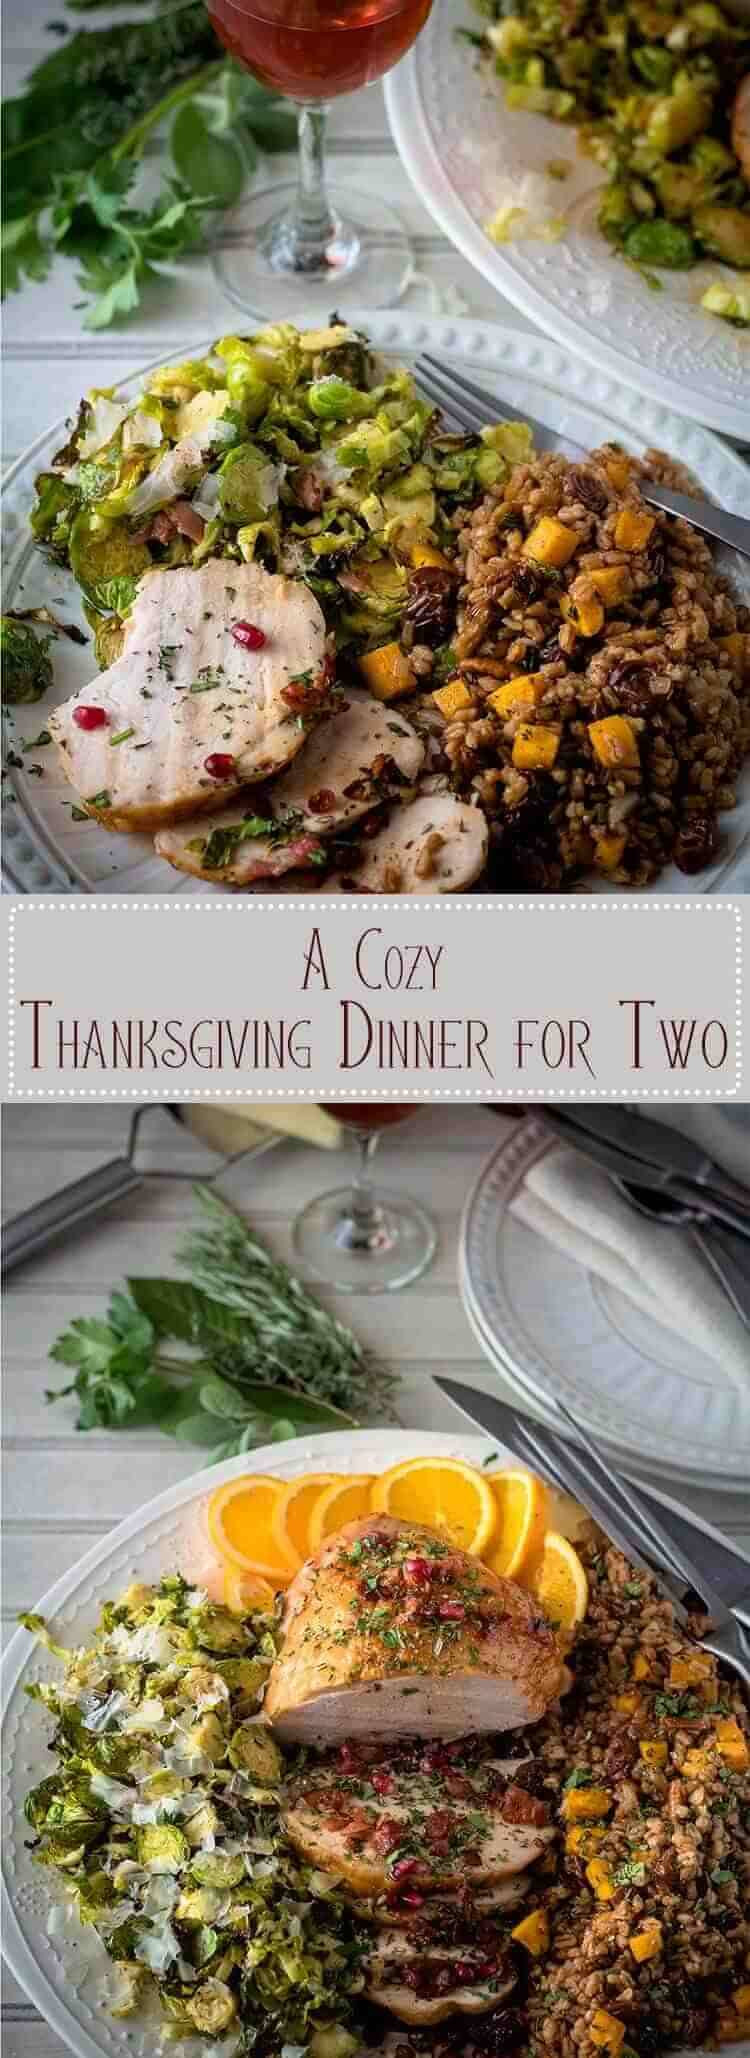 Thanksgiving Dinner For Two
 A Cozy Thanksgiving Dinner For Two Beyond Mere Sustenance